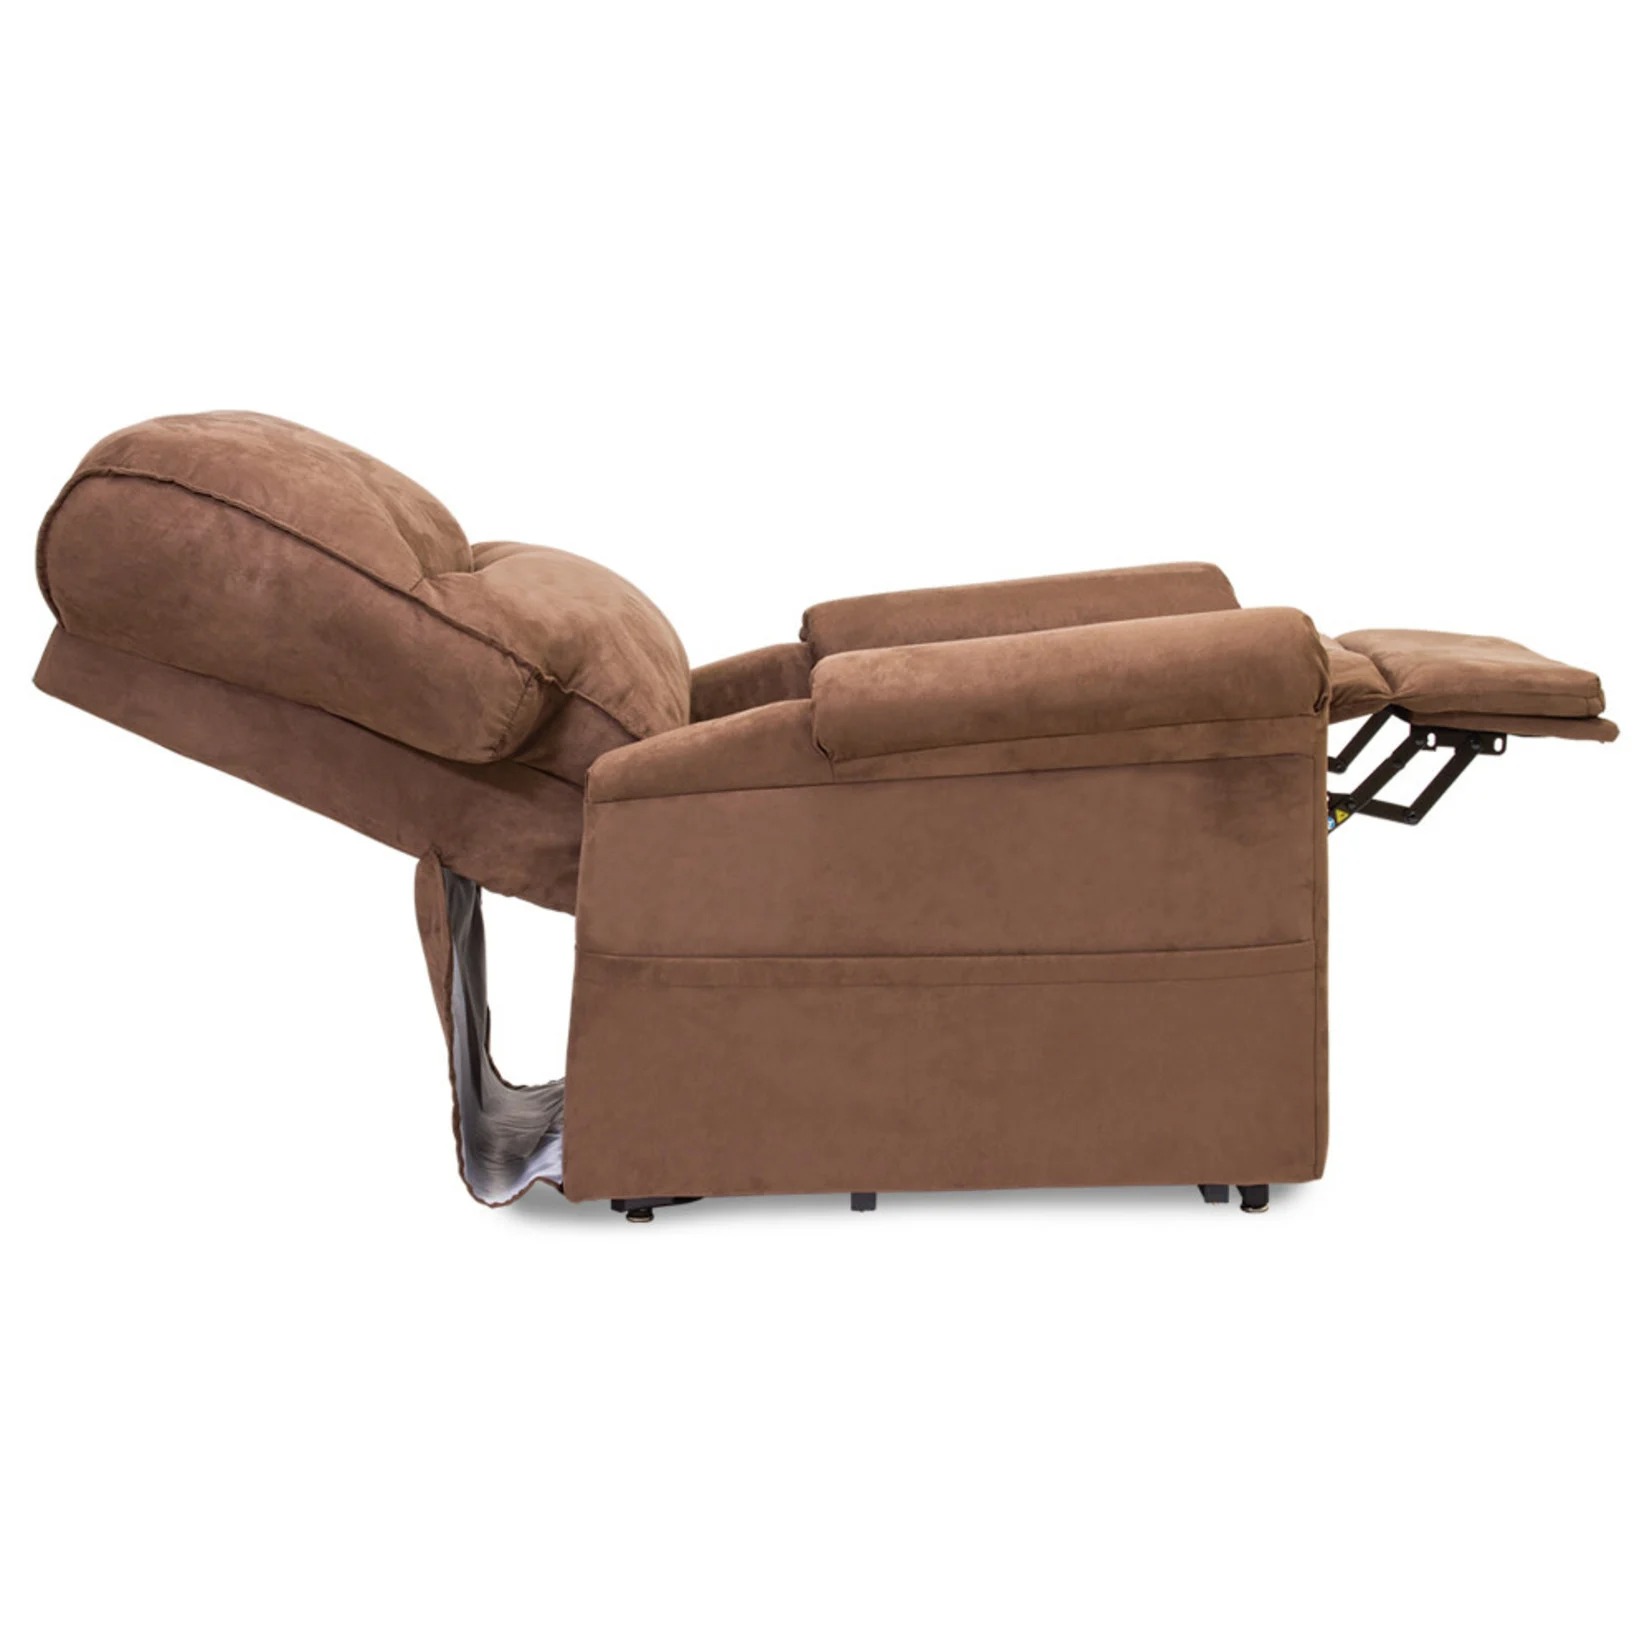 essential lc105 lift recliner side view of reclined position